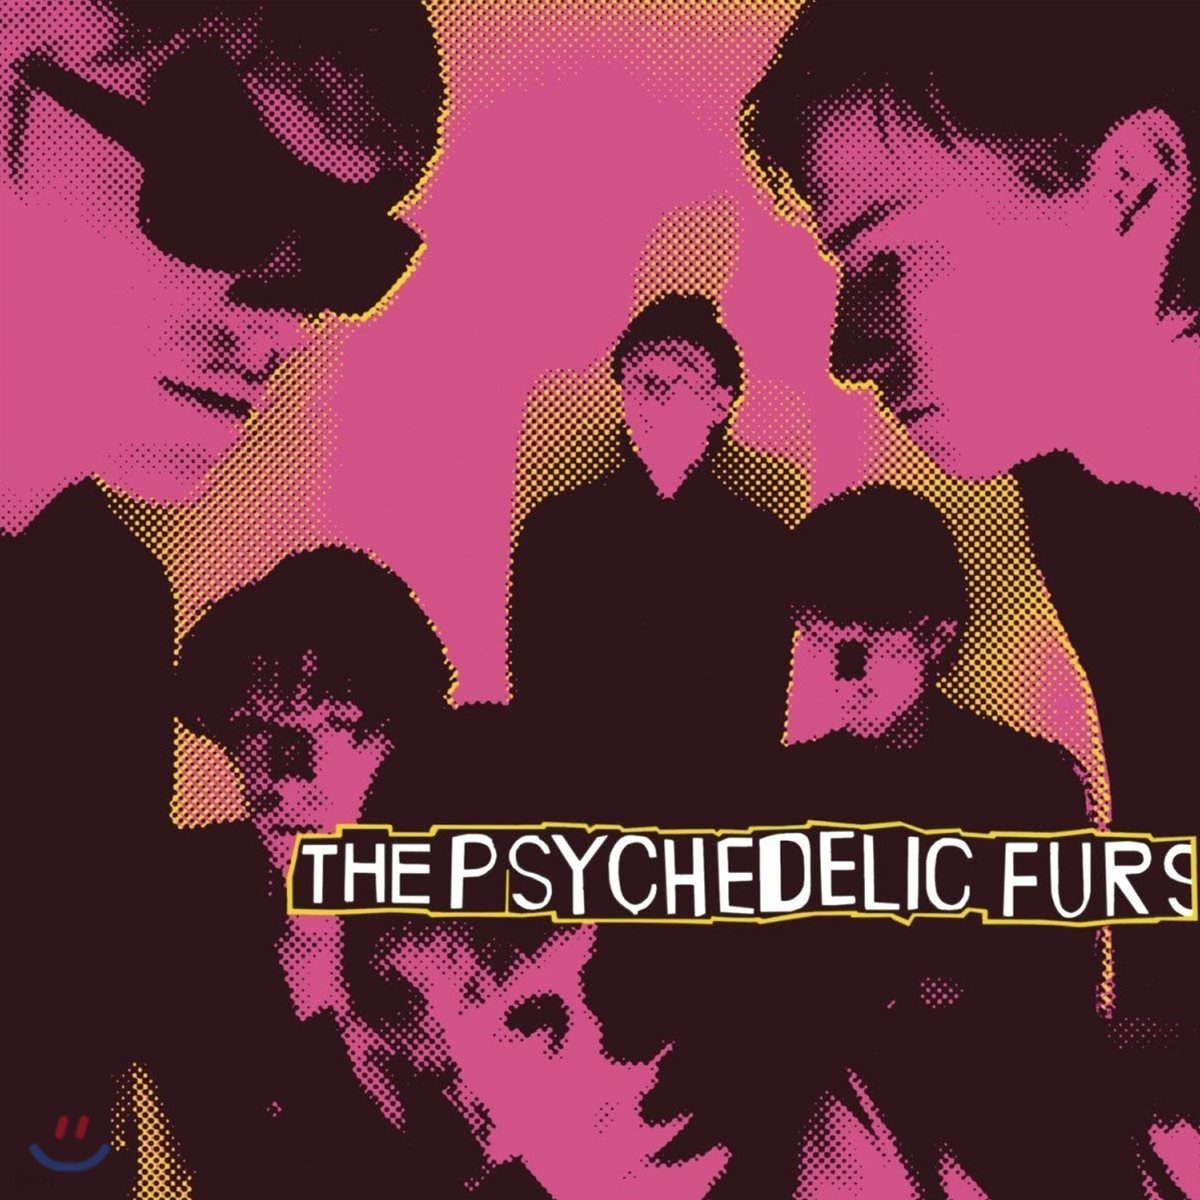 Psychedelic Furs - The Psychedelic Furs 싸이키델릭 퍼스 데뷔 앨범 [LP]